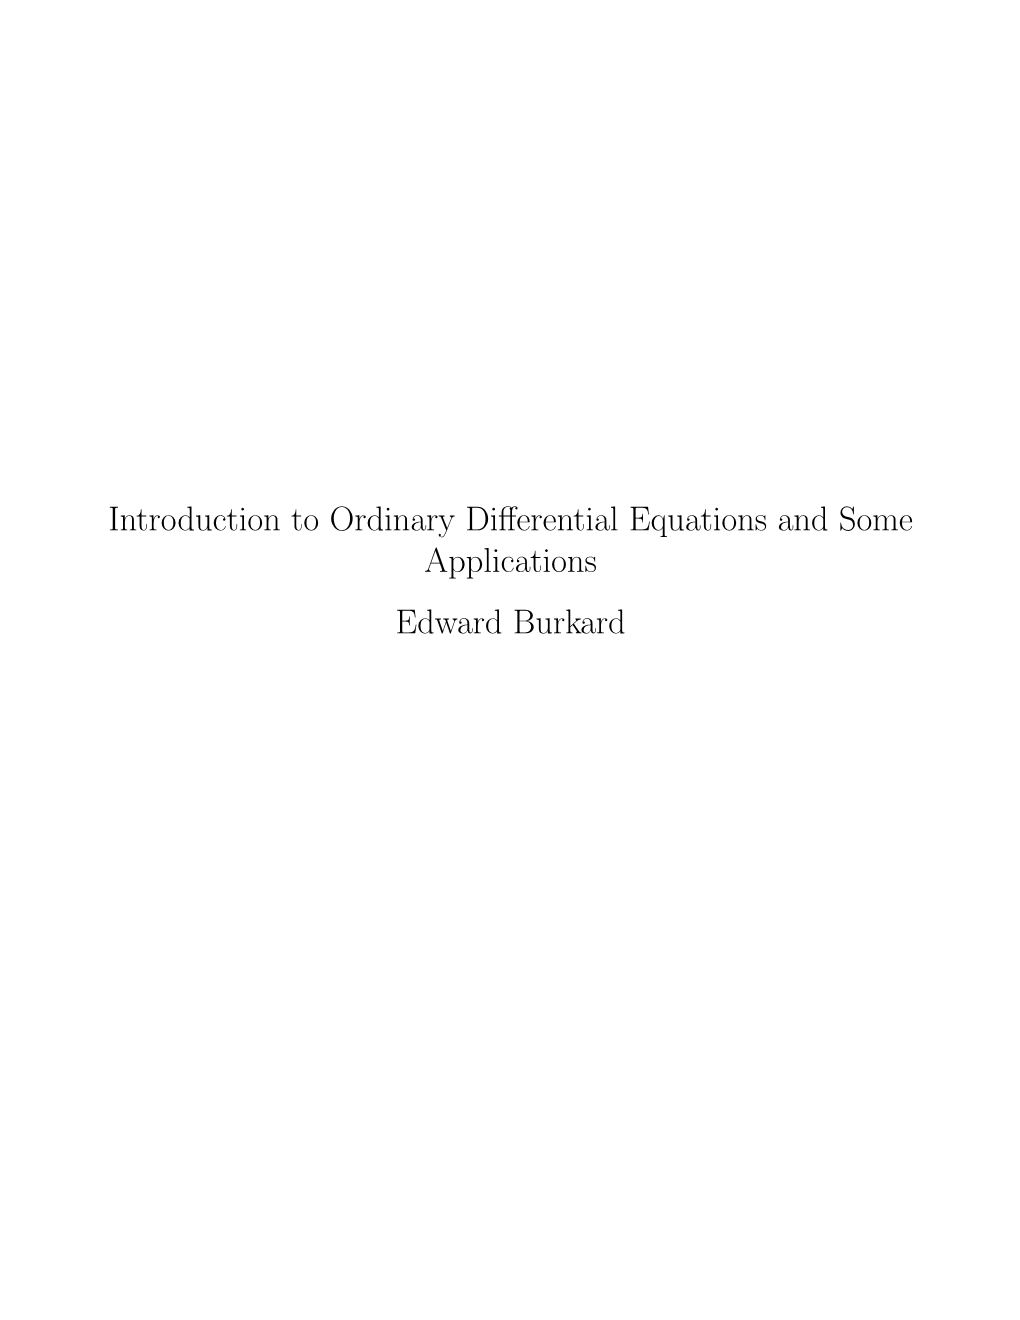 Introduction to Ordinary Differential